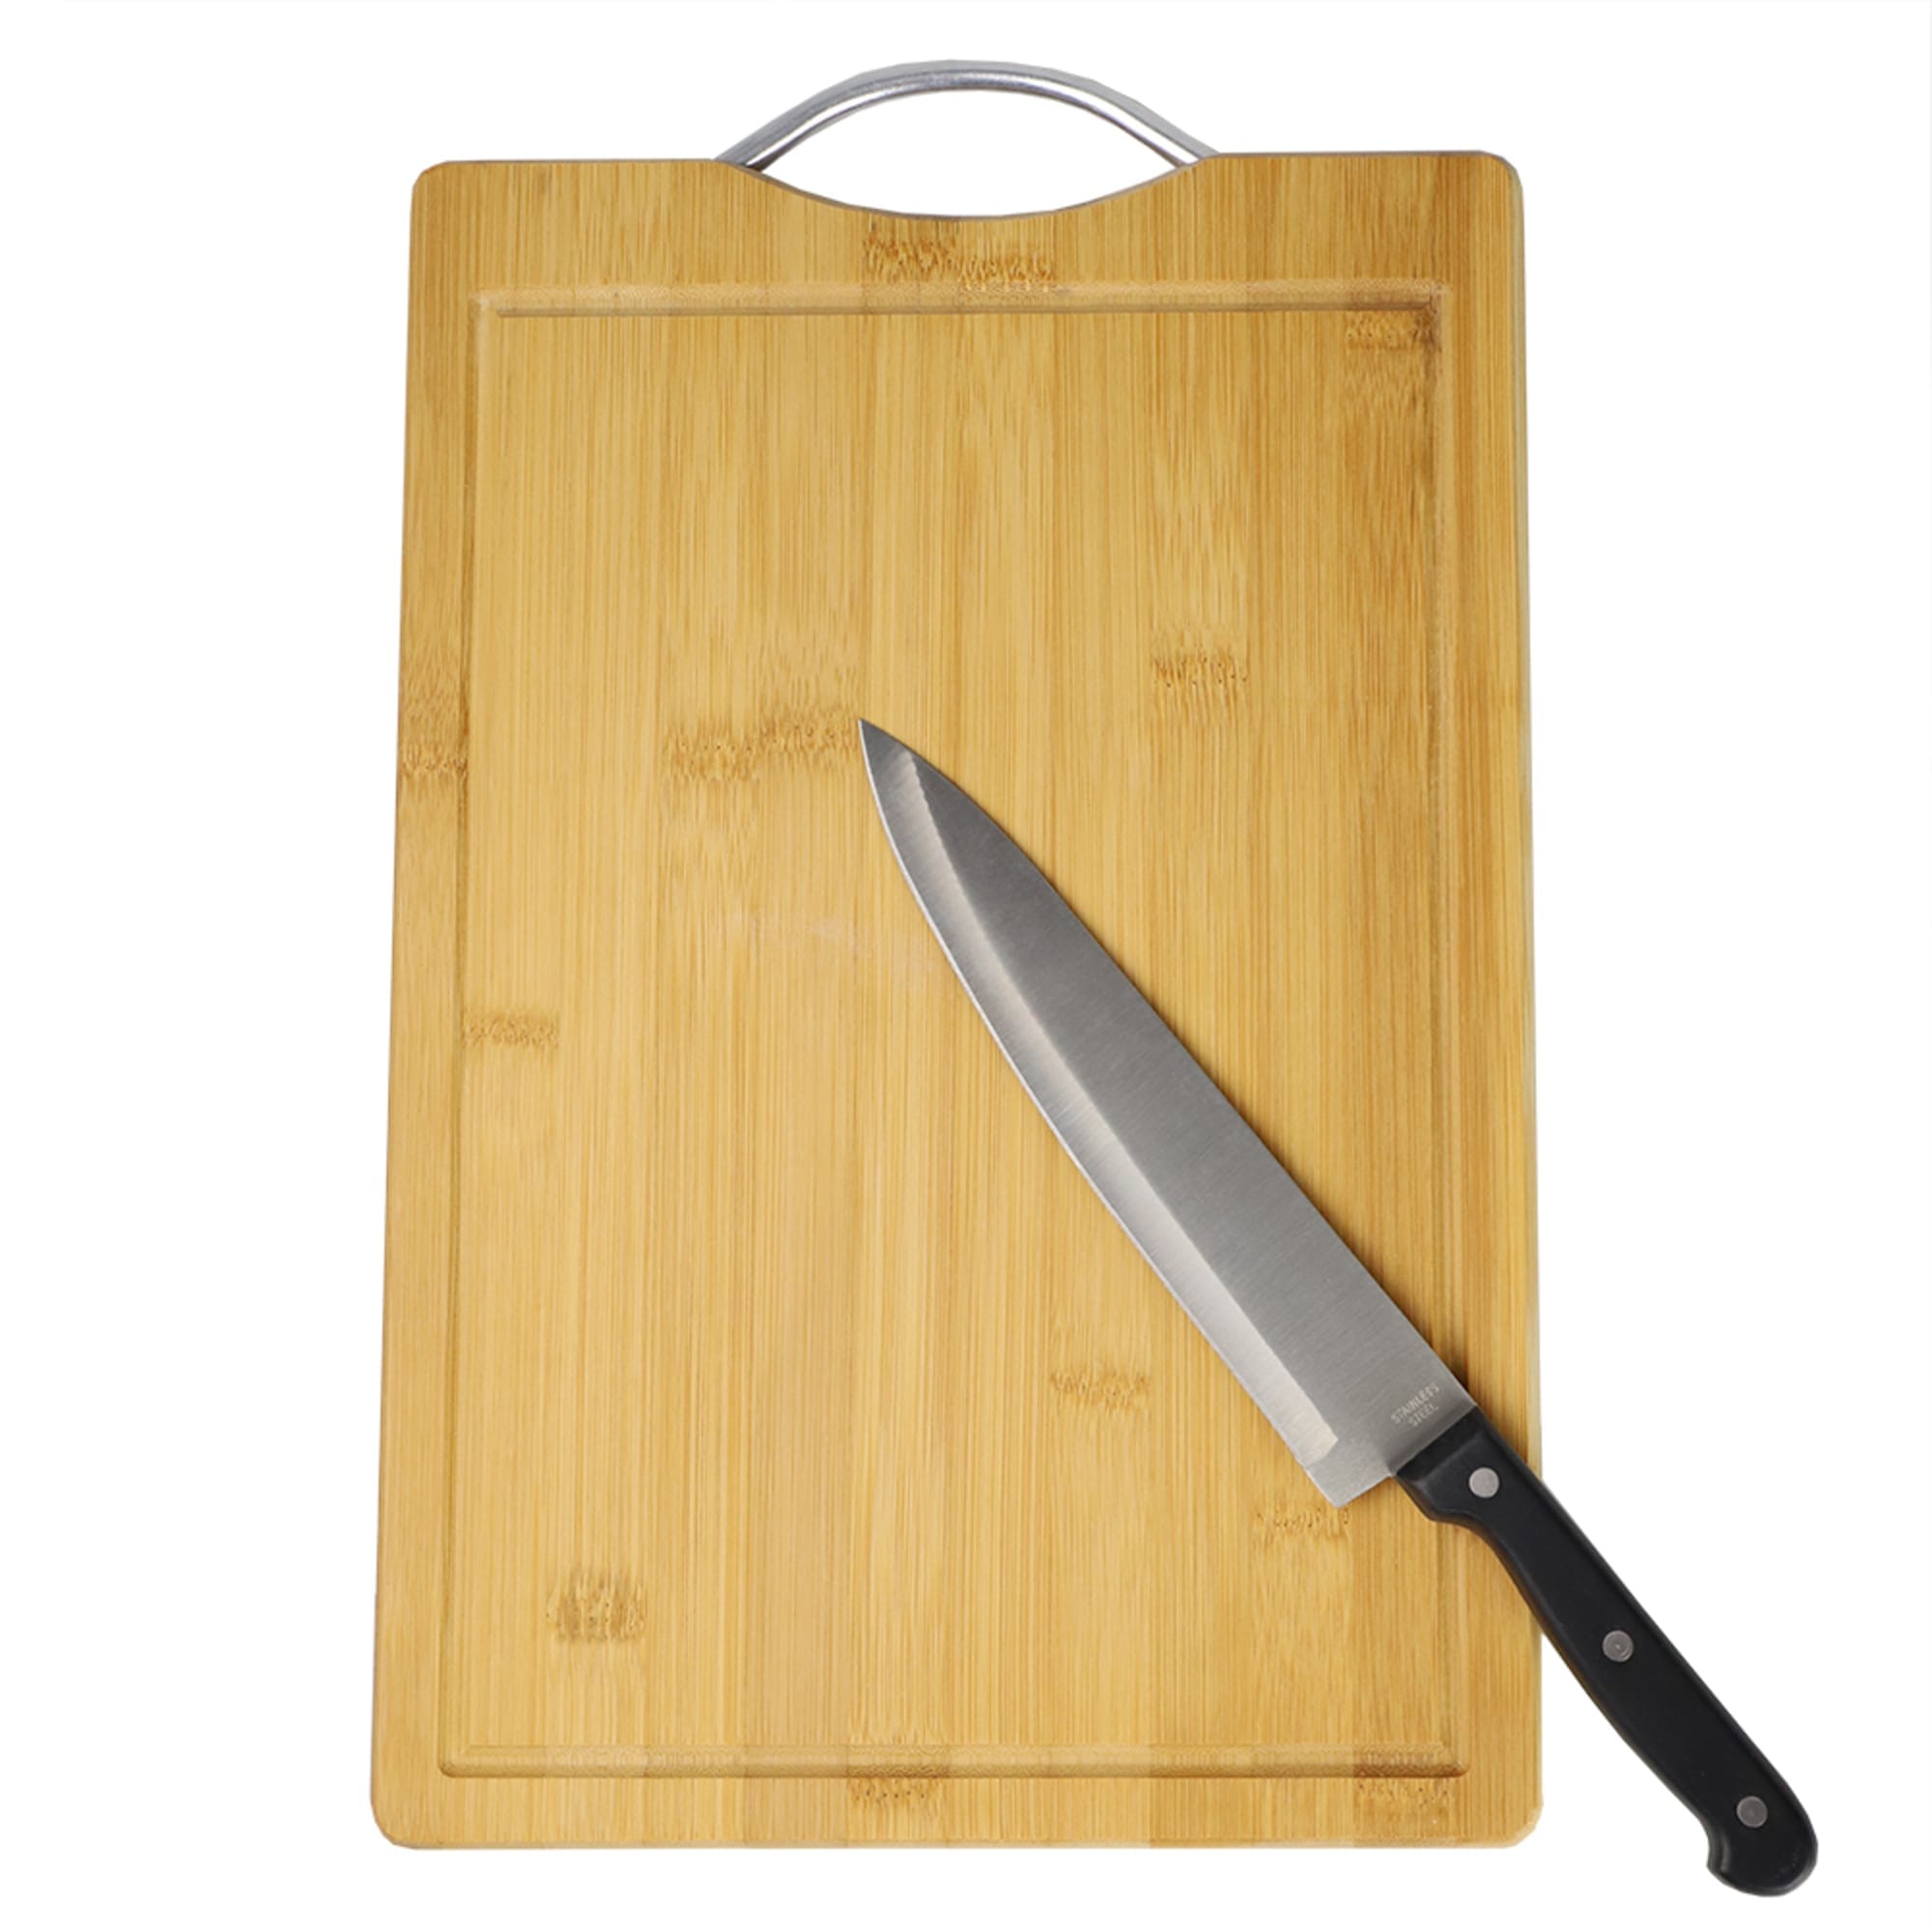 Home Basics 10" x 15" Bamboo Cutting Board with Juice Groove and Stainless Steel Handle $5.00 EACH, CASE PACK OF 12